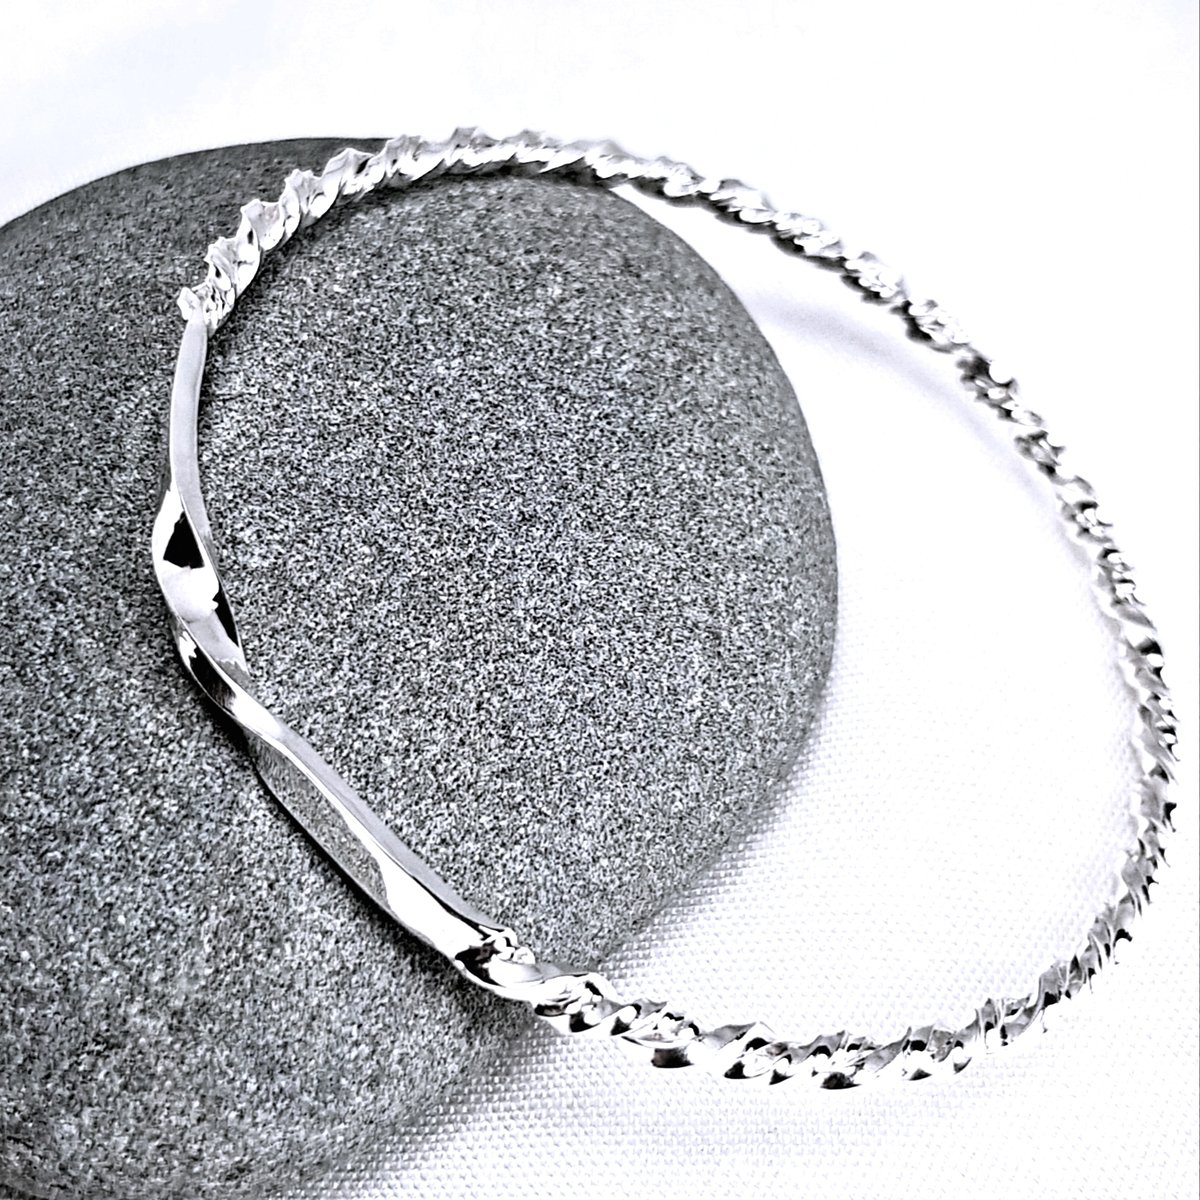 Image of Chunky Sterling Silver Bangle, Silver Twist Bangle, Recycled Silver, Sustainable Jewellery UK